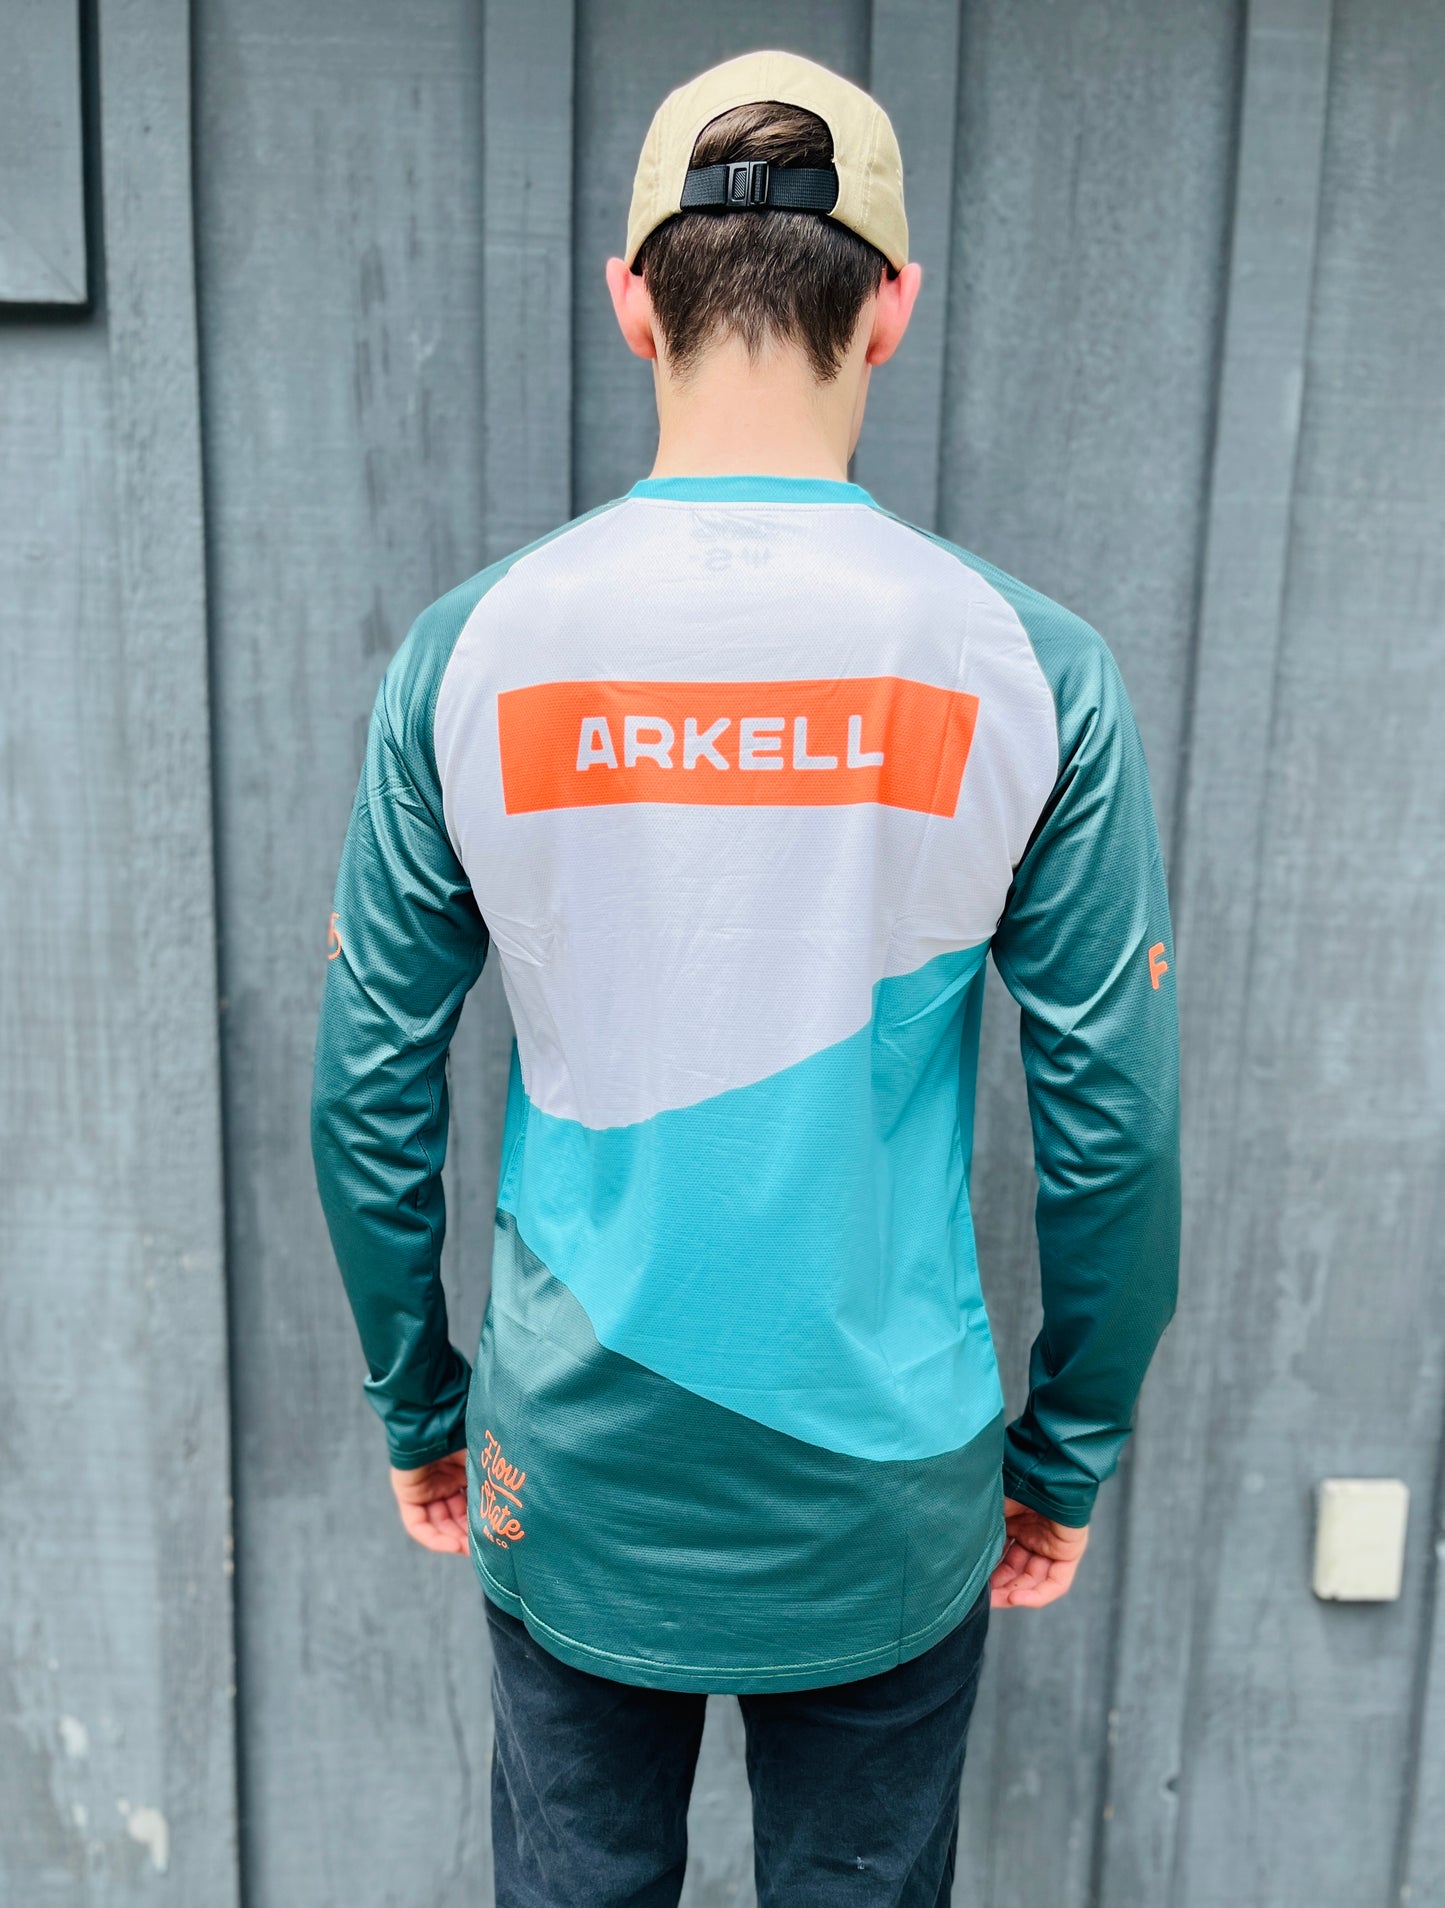 Arkell Jersey 2.0 - All-Mountain Mode